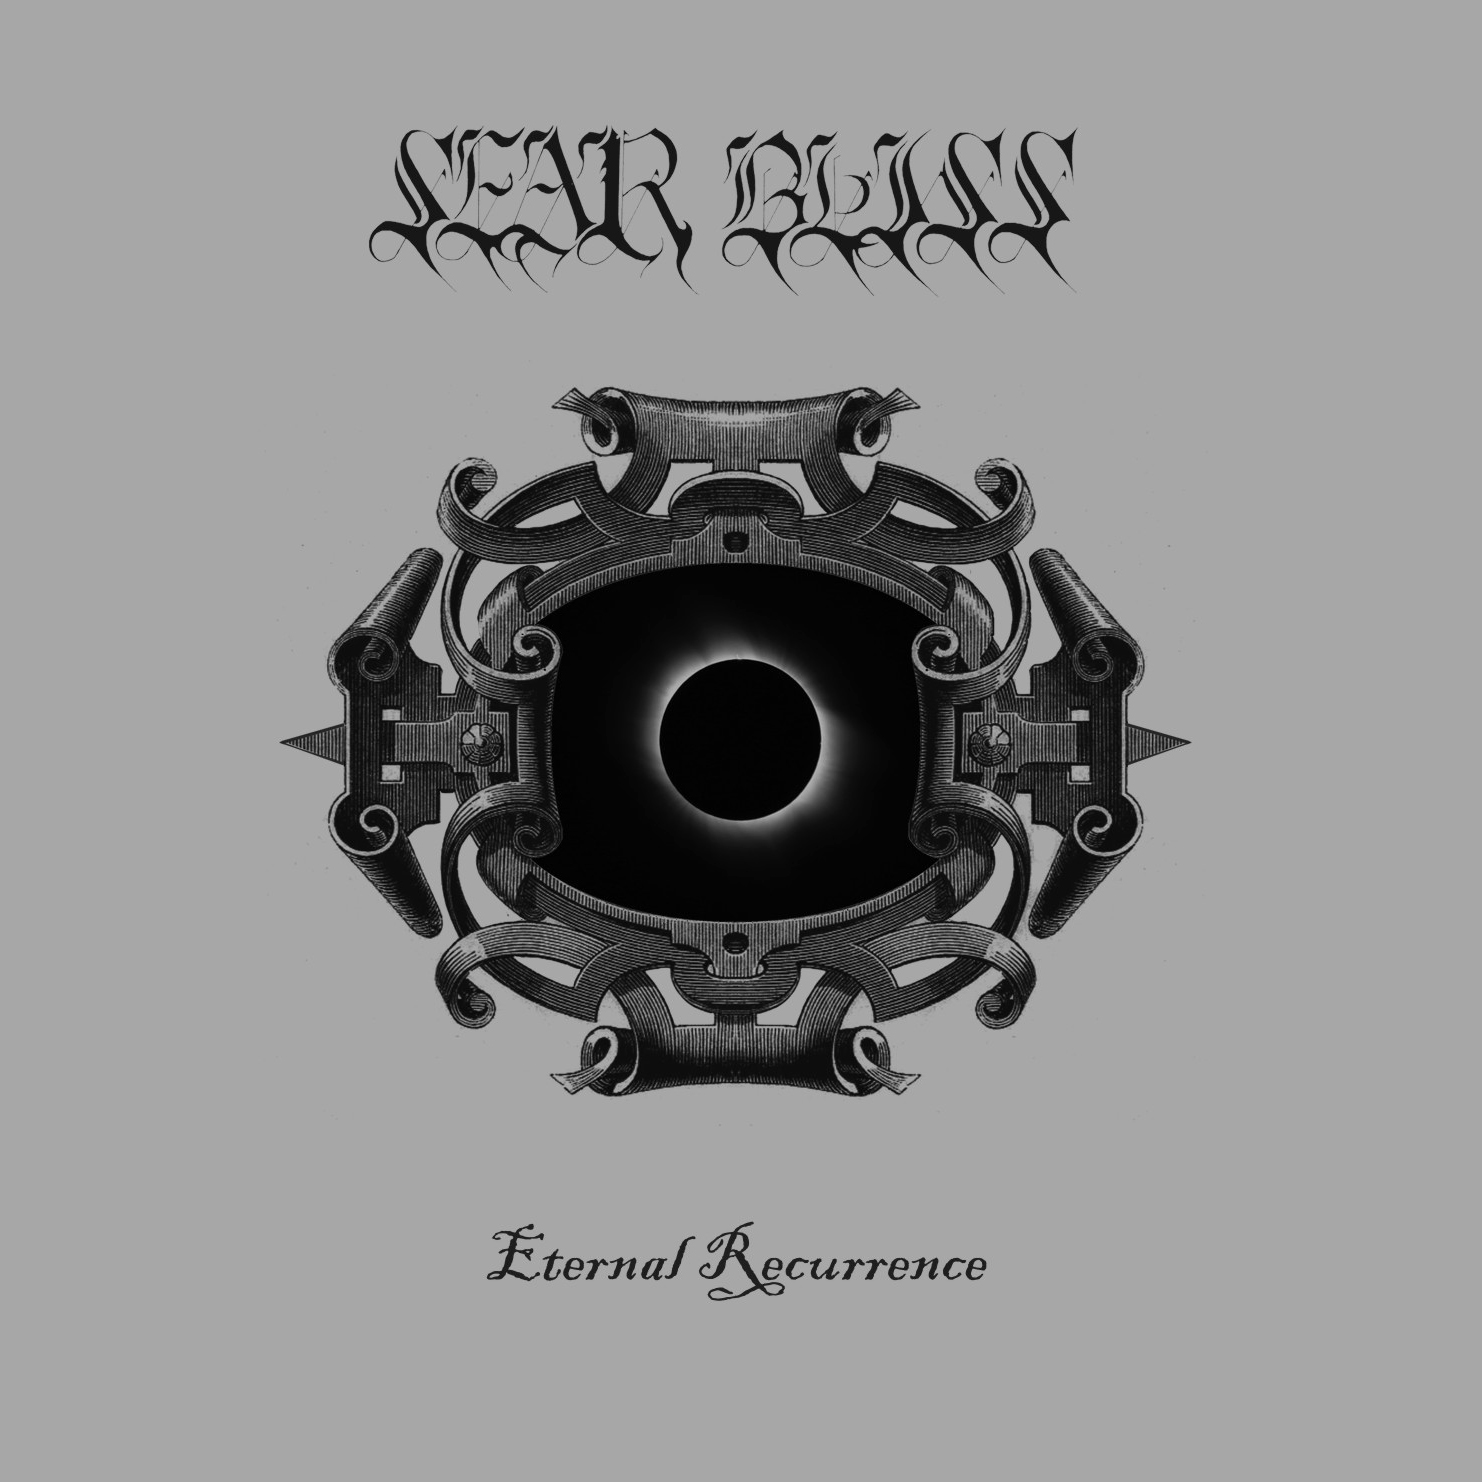 Sear Bliss – Eternal Recurrence Review